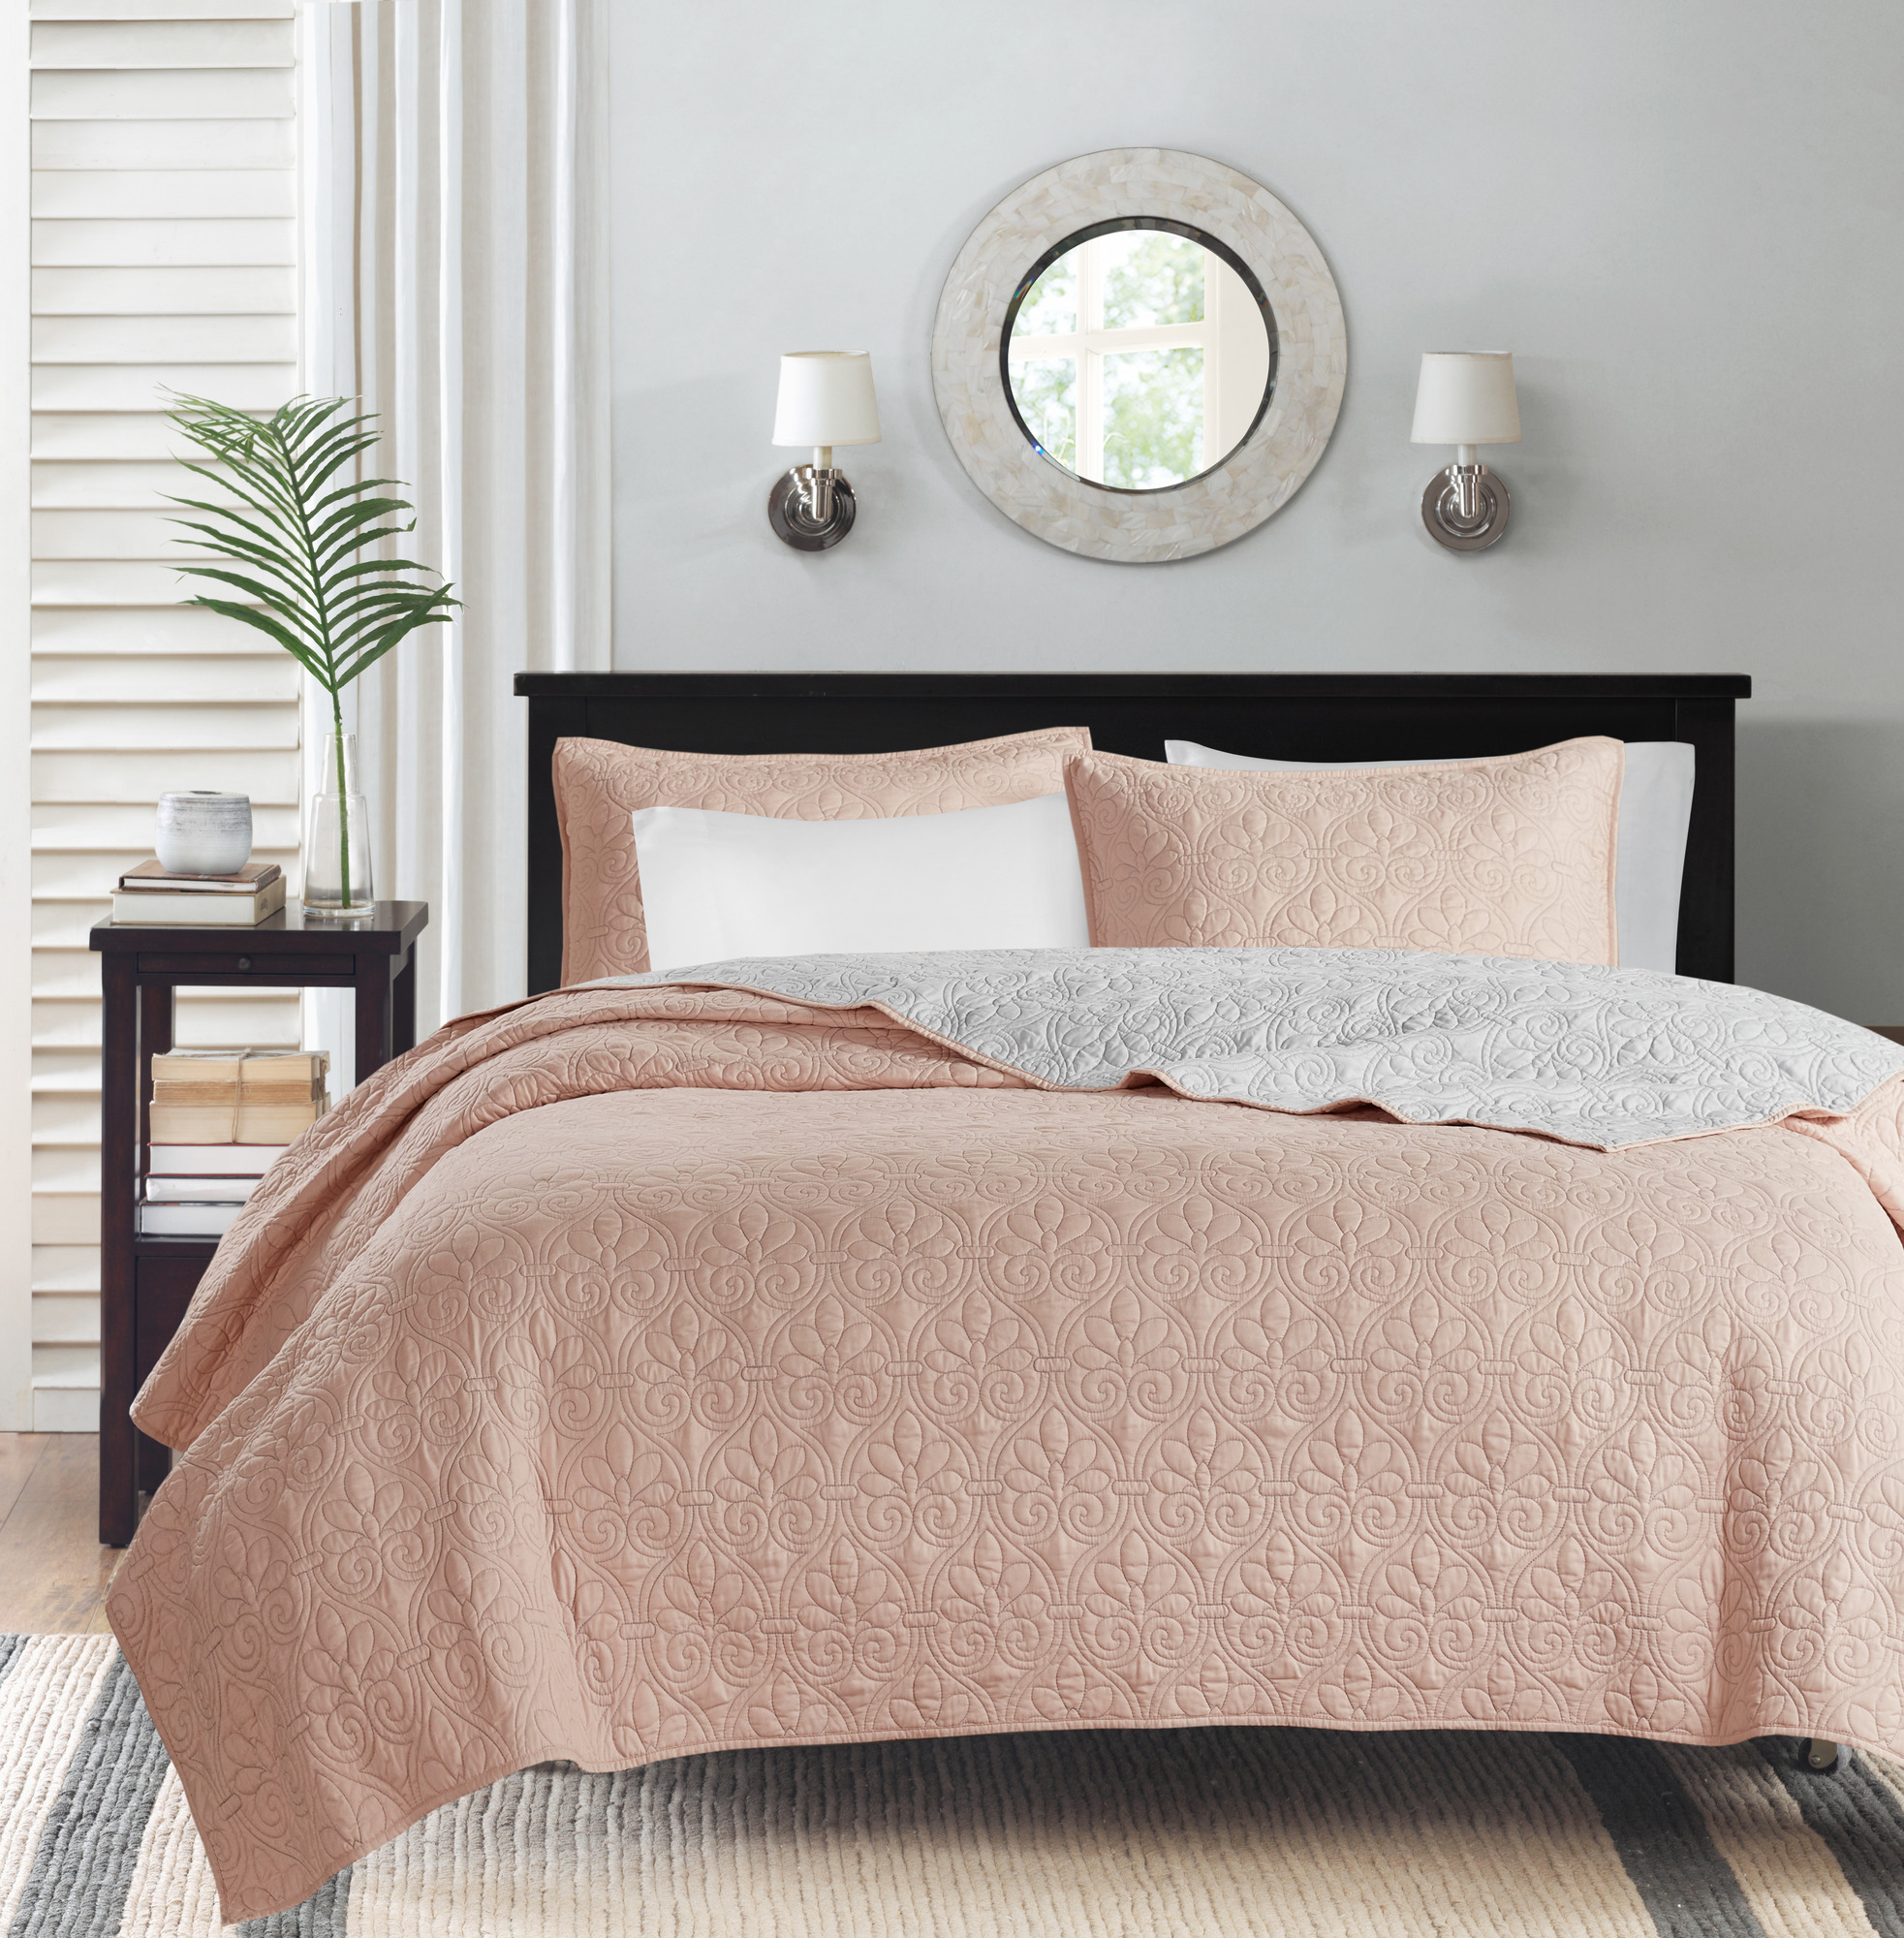 Home Essence Vancouver Super Soft Reversible Coverlet Set, Blush/Light Grey, Full/Queen - image 4 of 22